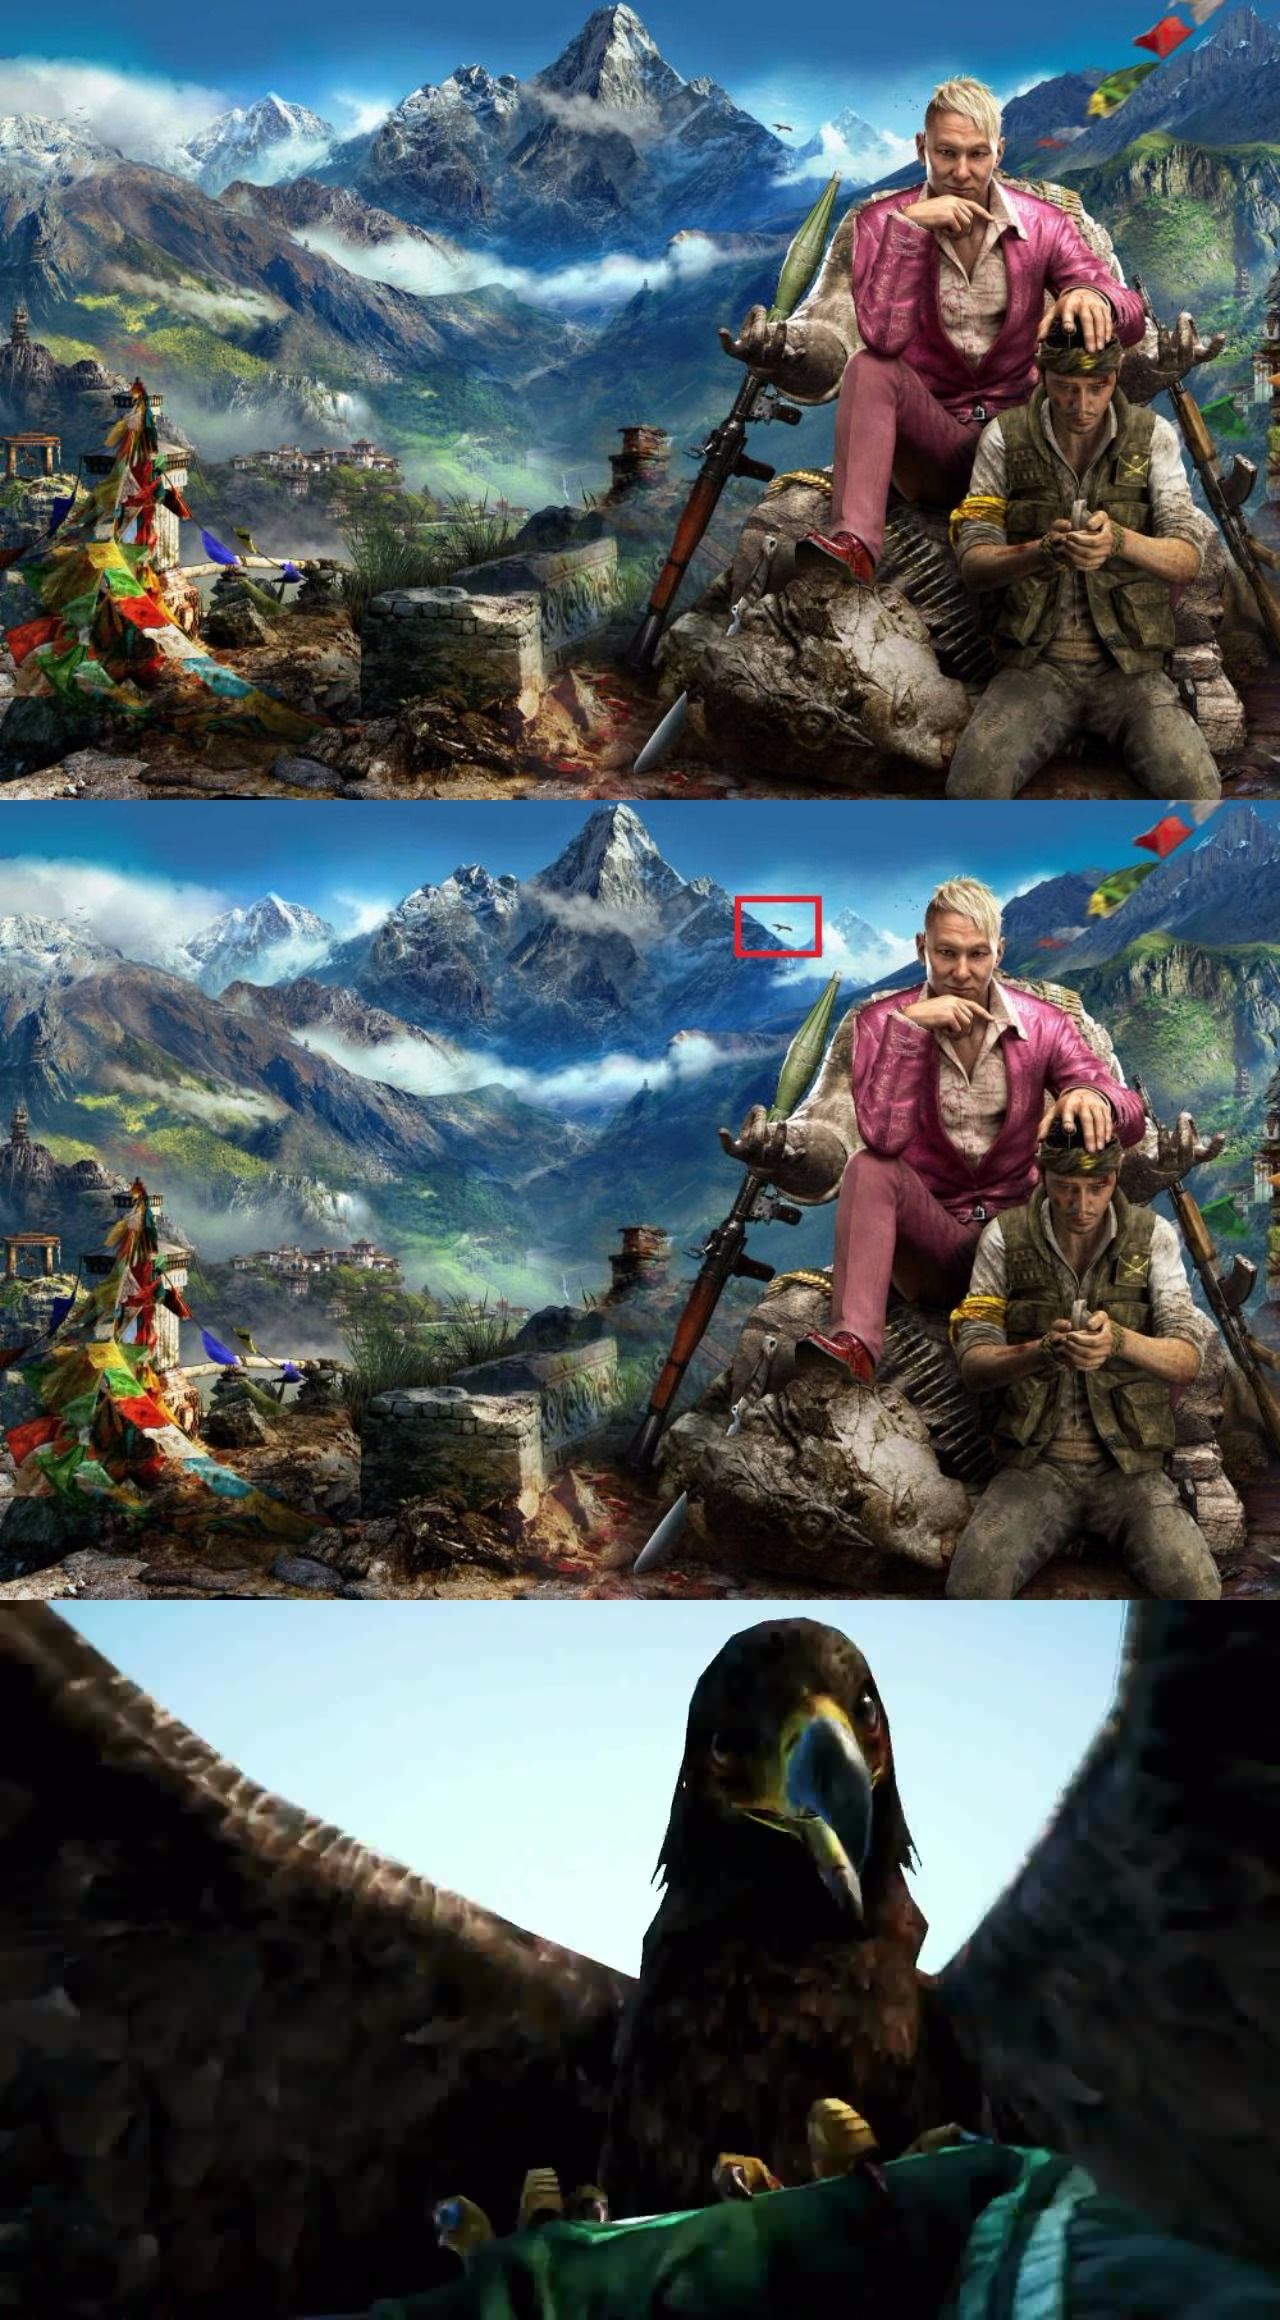 Far Cry 4 title screen showing one of the most despicable and fearsome villains in gaming